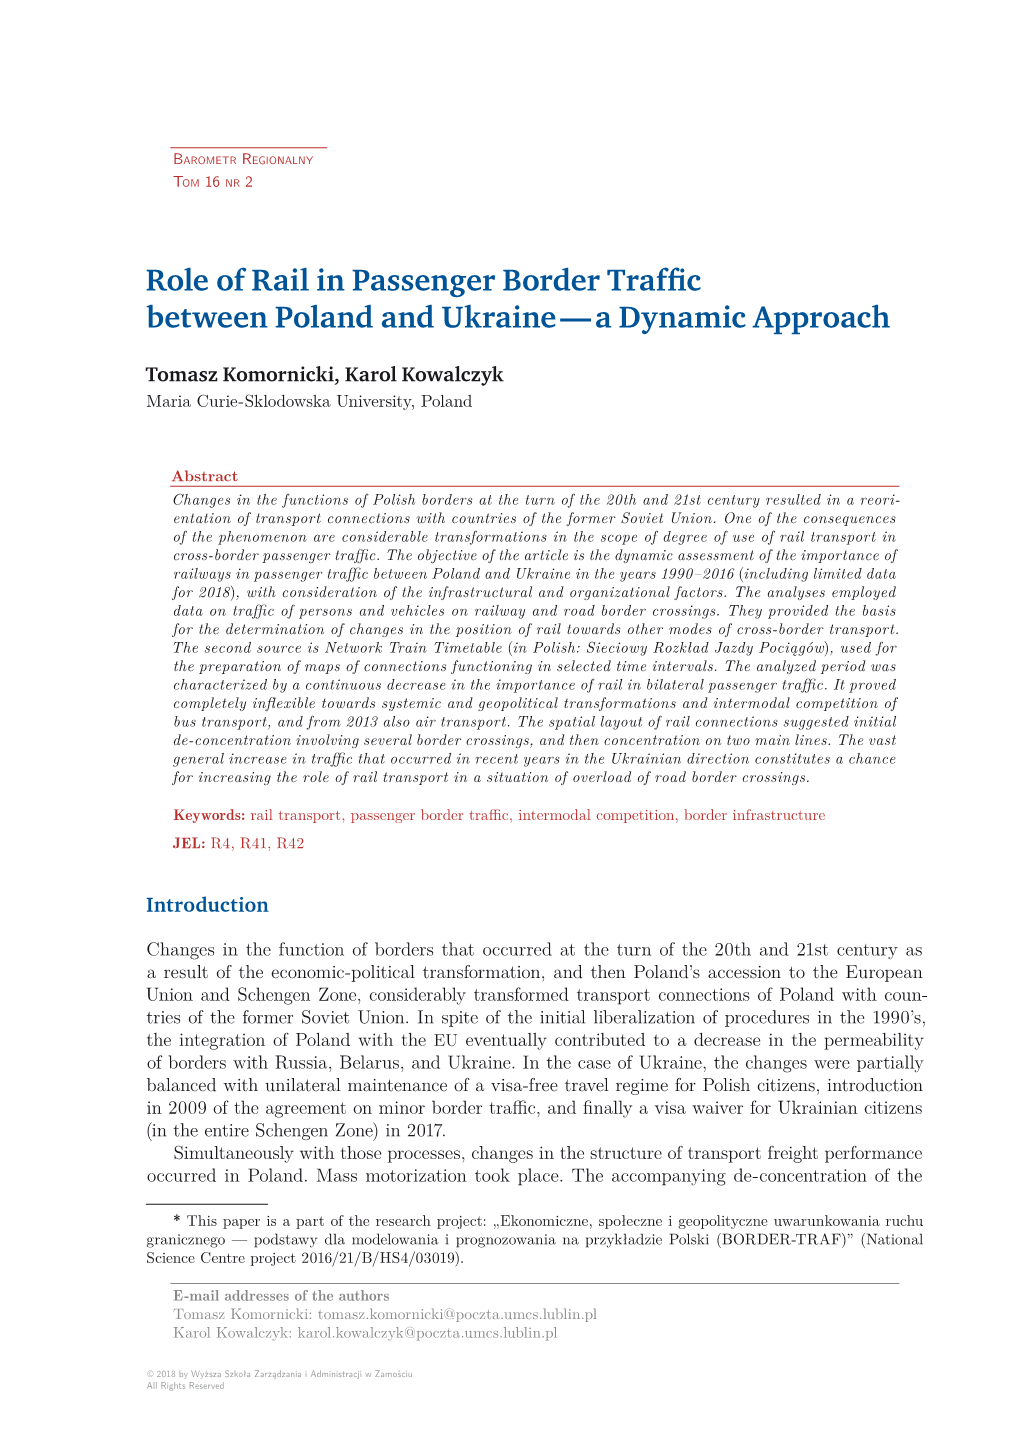 Role of Rail in Passenger Border Traffic Between Poland and Ukraine — a Dynamic Approach